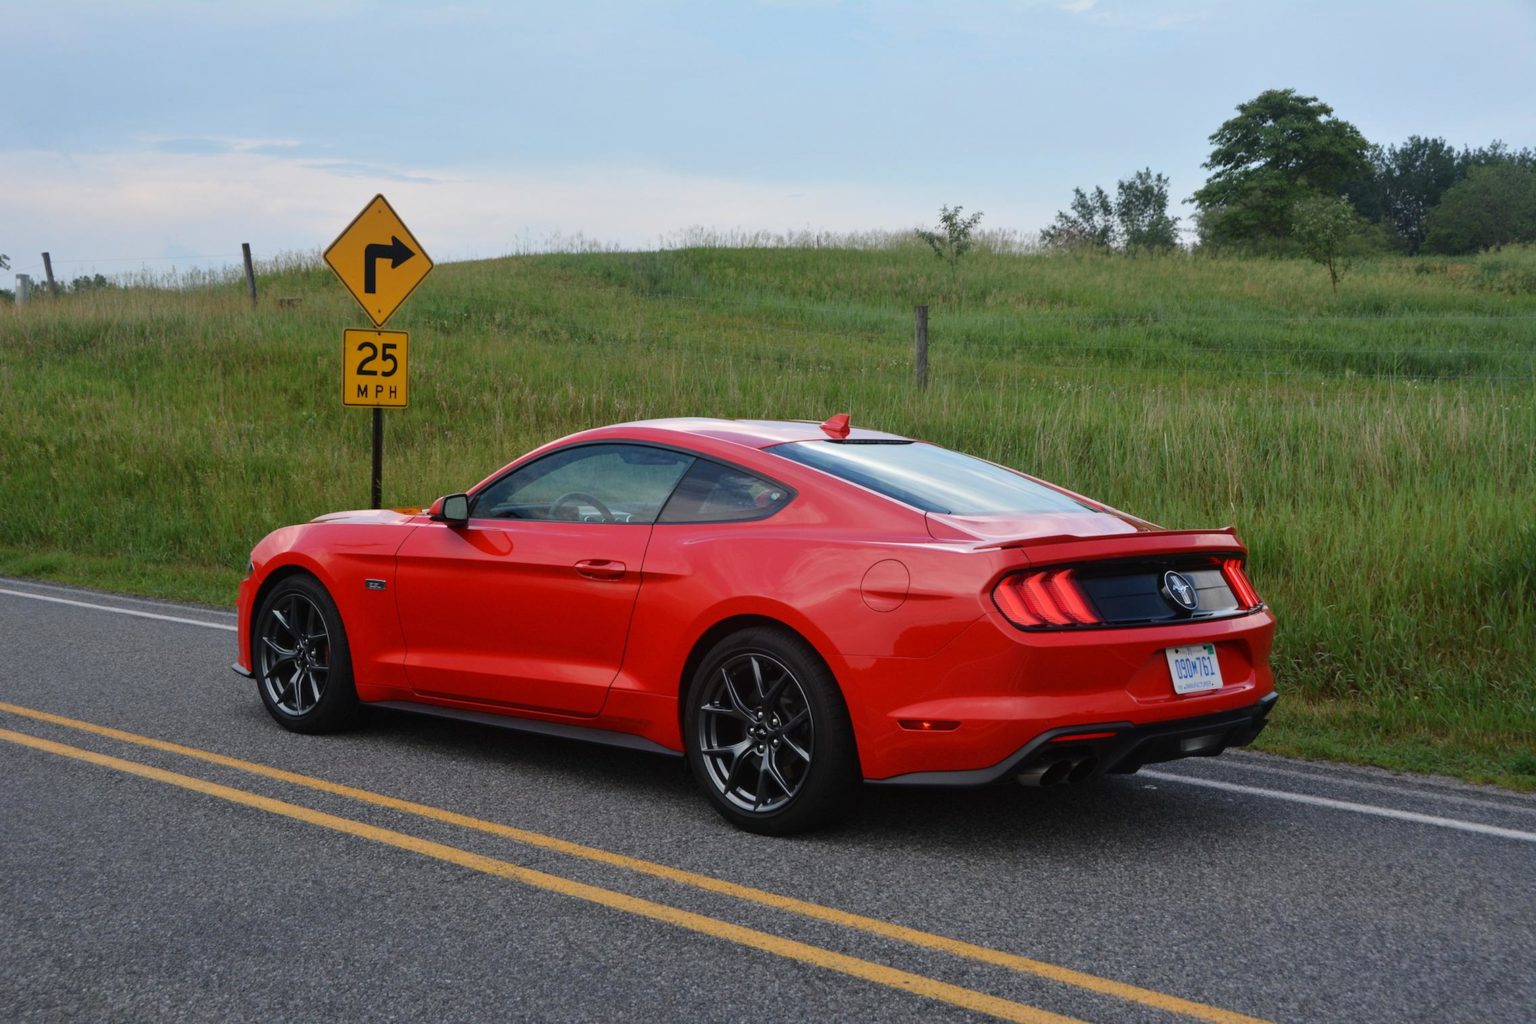 2021 Ford Mustang Ecoboost Review: The 6 Speed Manual Version - GTspirit